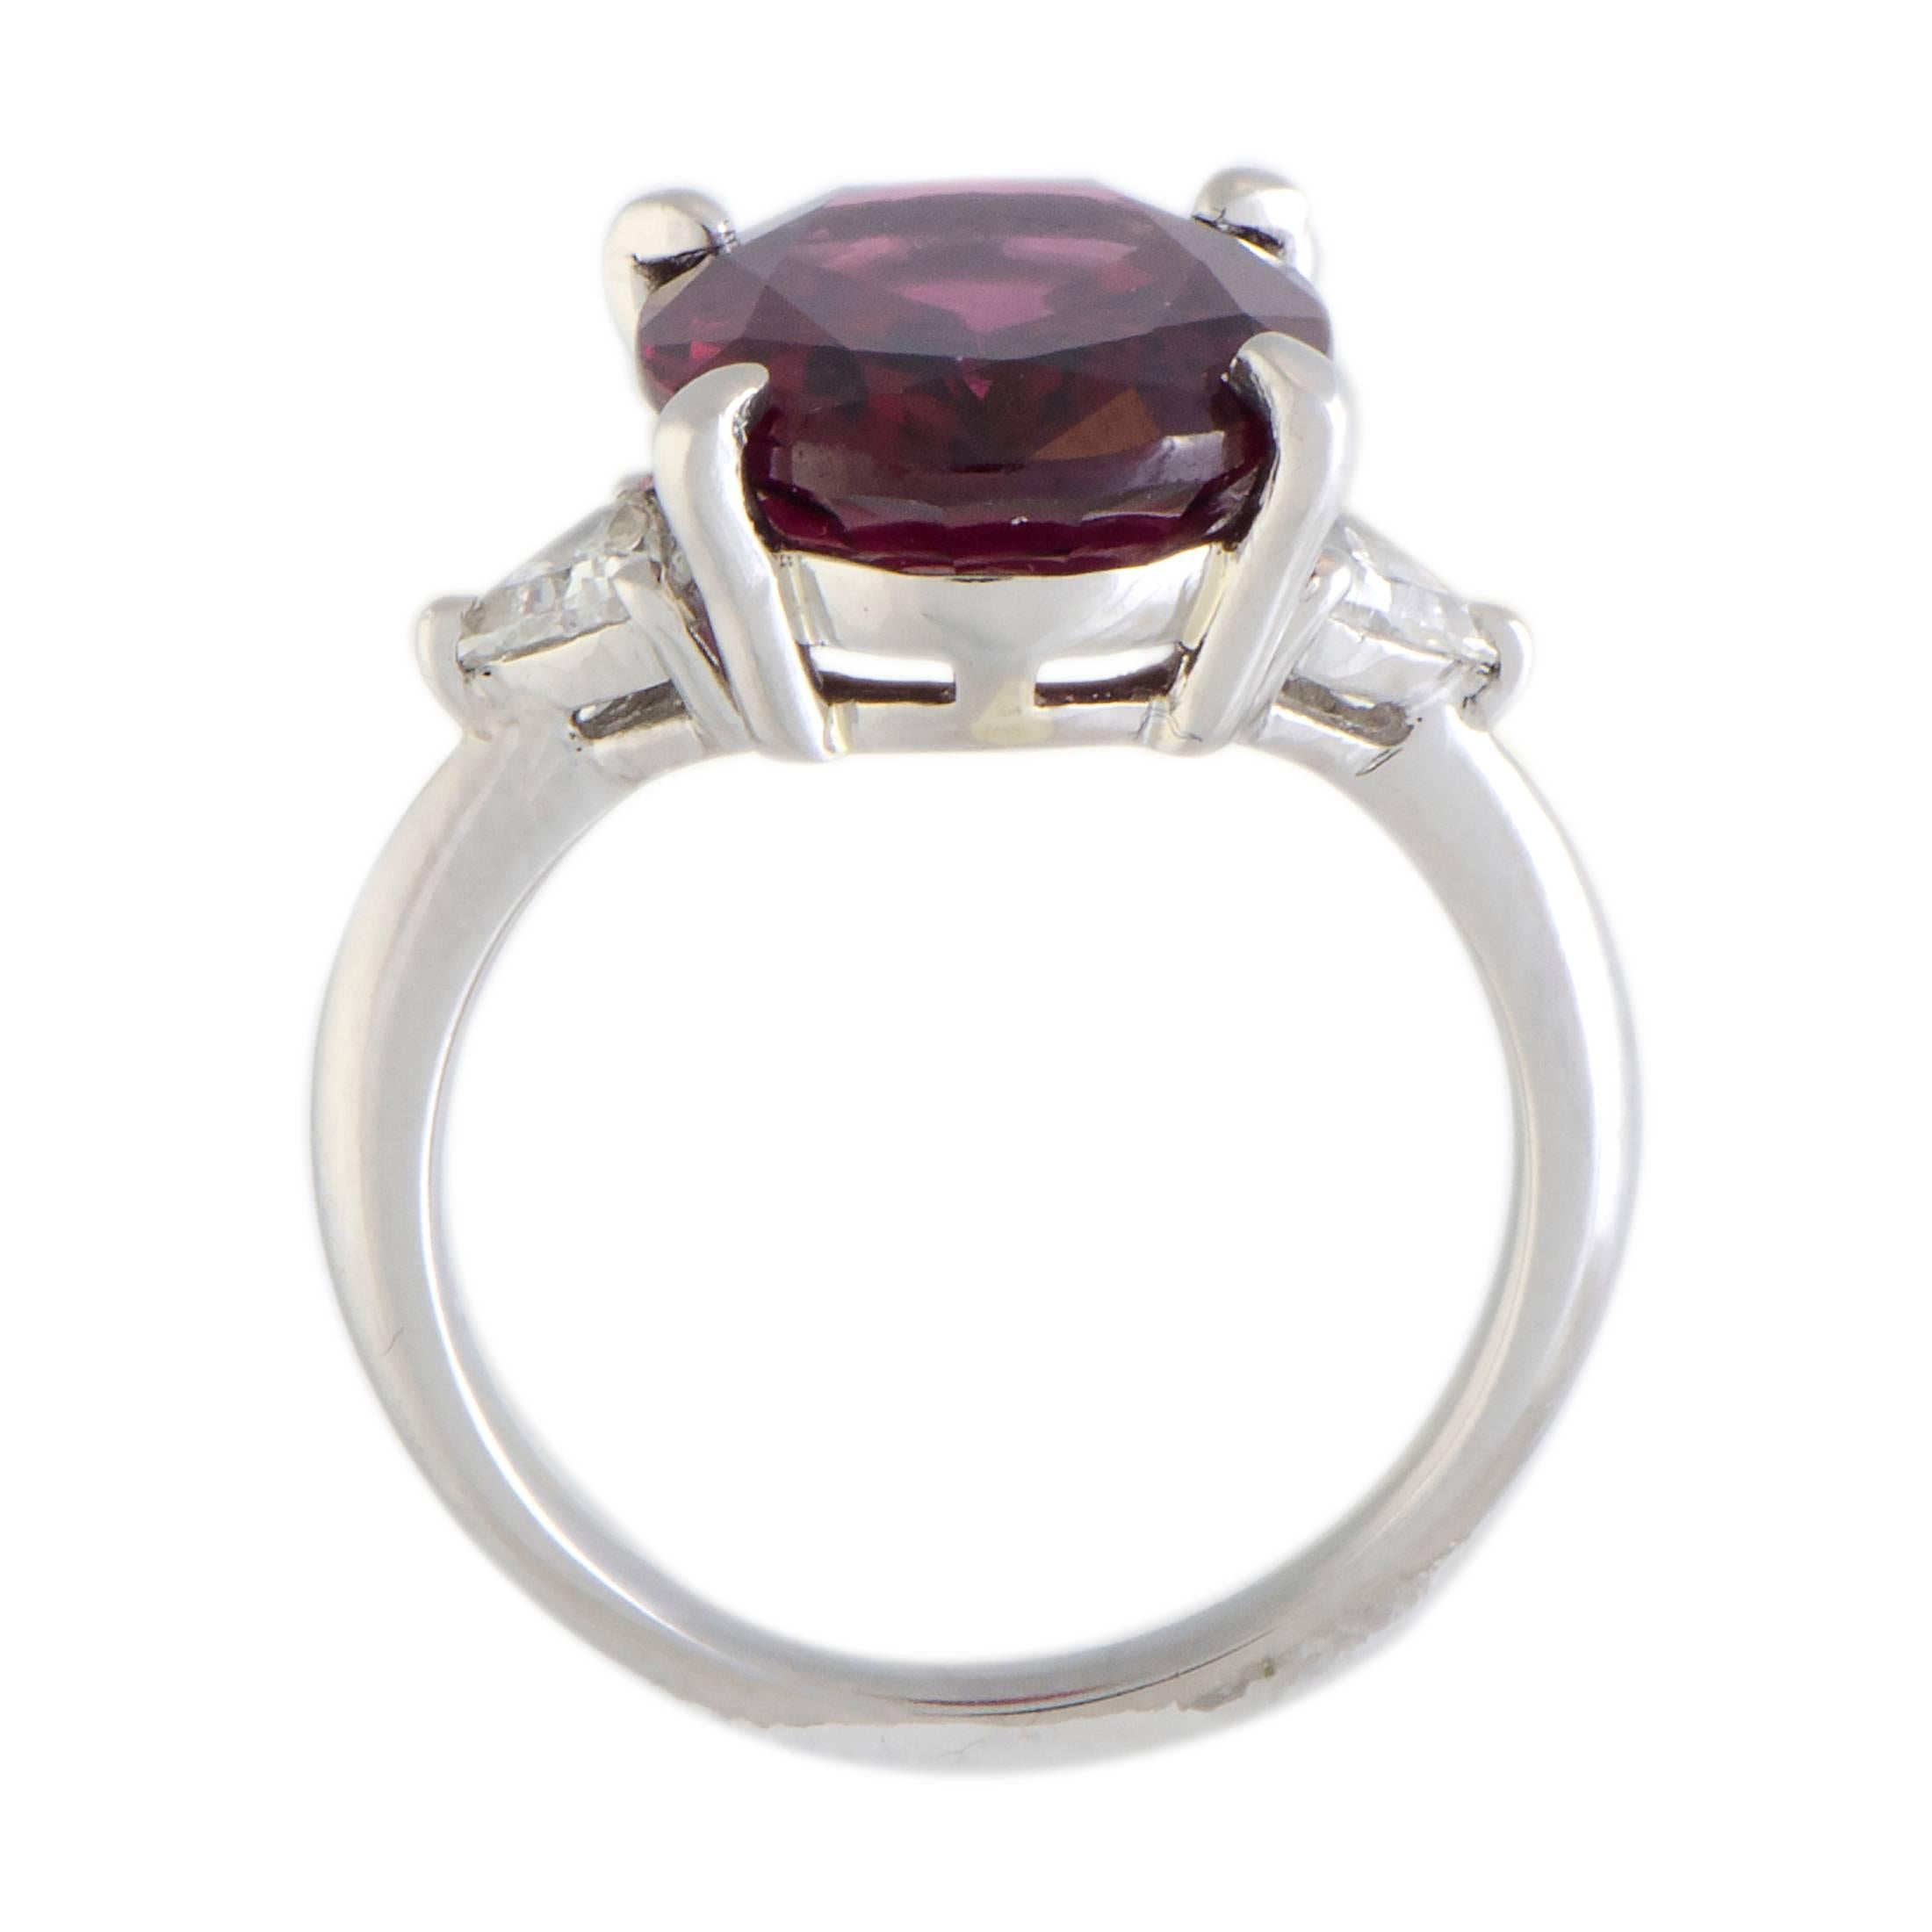 The captivating pink tourmaline is the star of the show in this splendid ring that features elegant design and is made of prestigious platinum. The tourmaline weighs 6.80 carats and it is accentuated by glistening diamonds that amount to 0.28